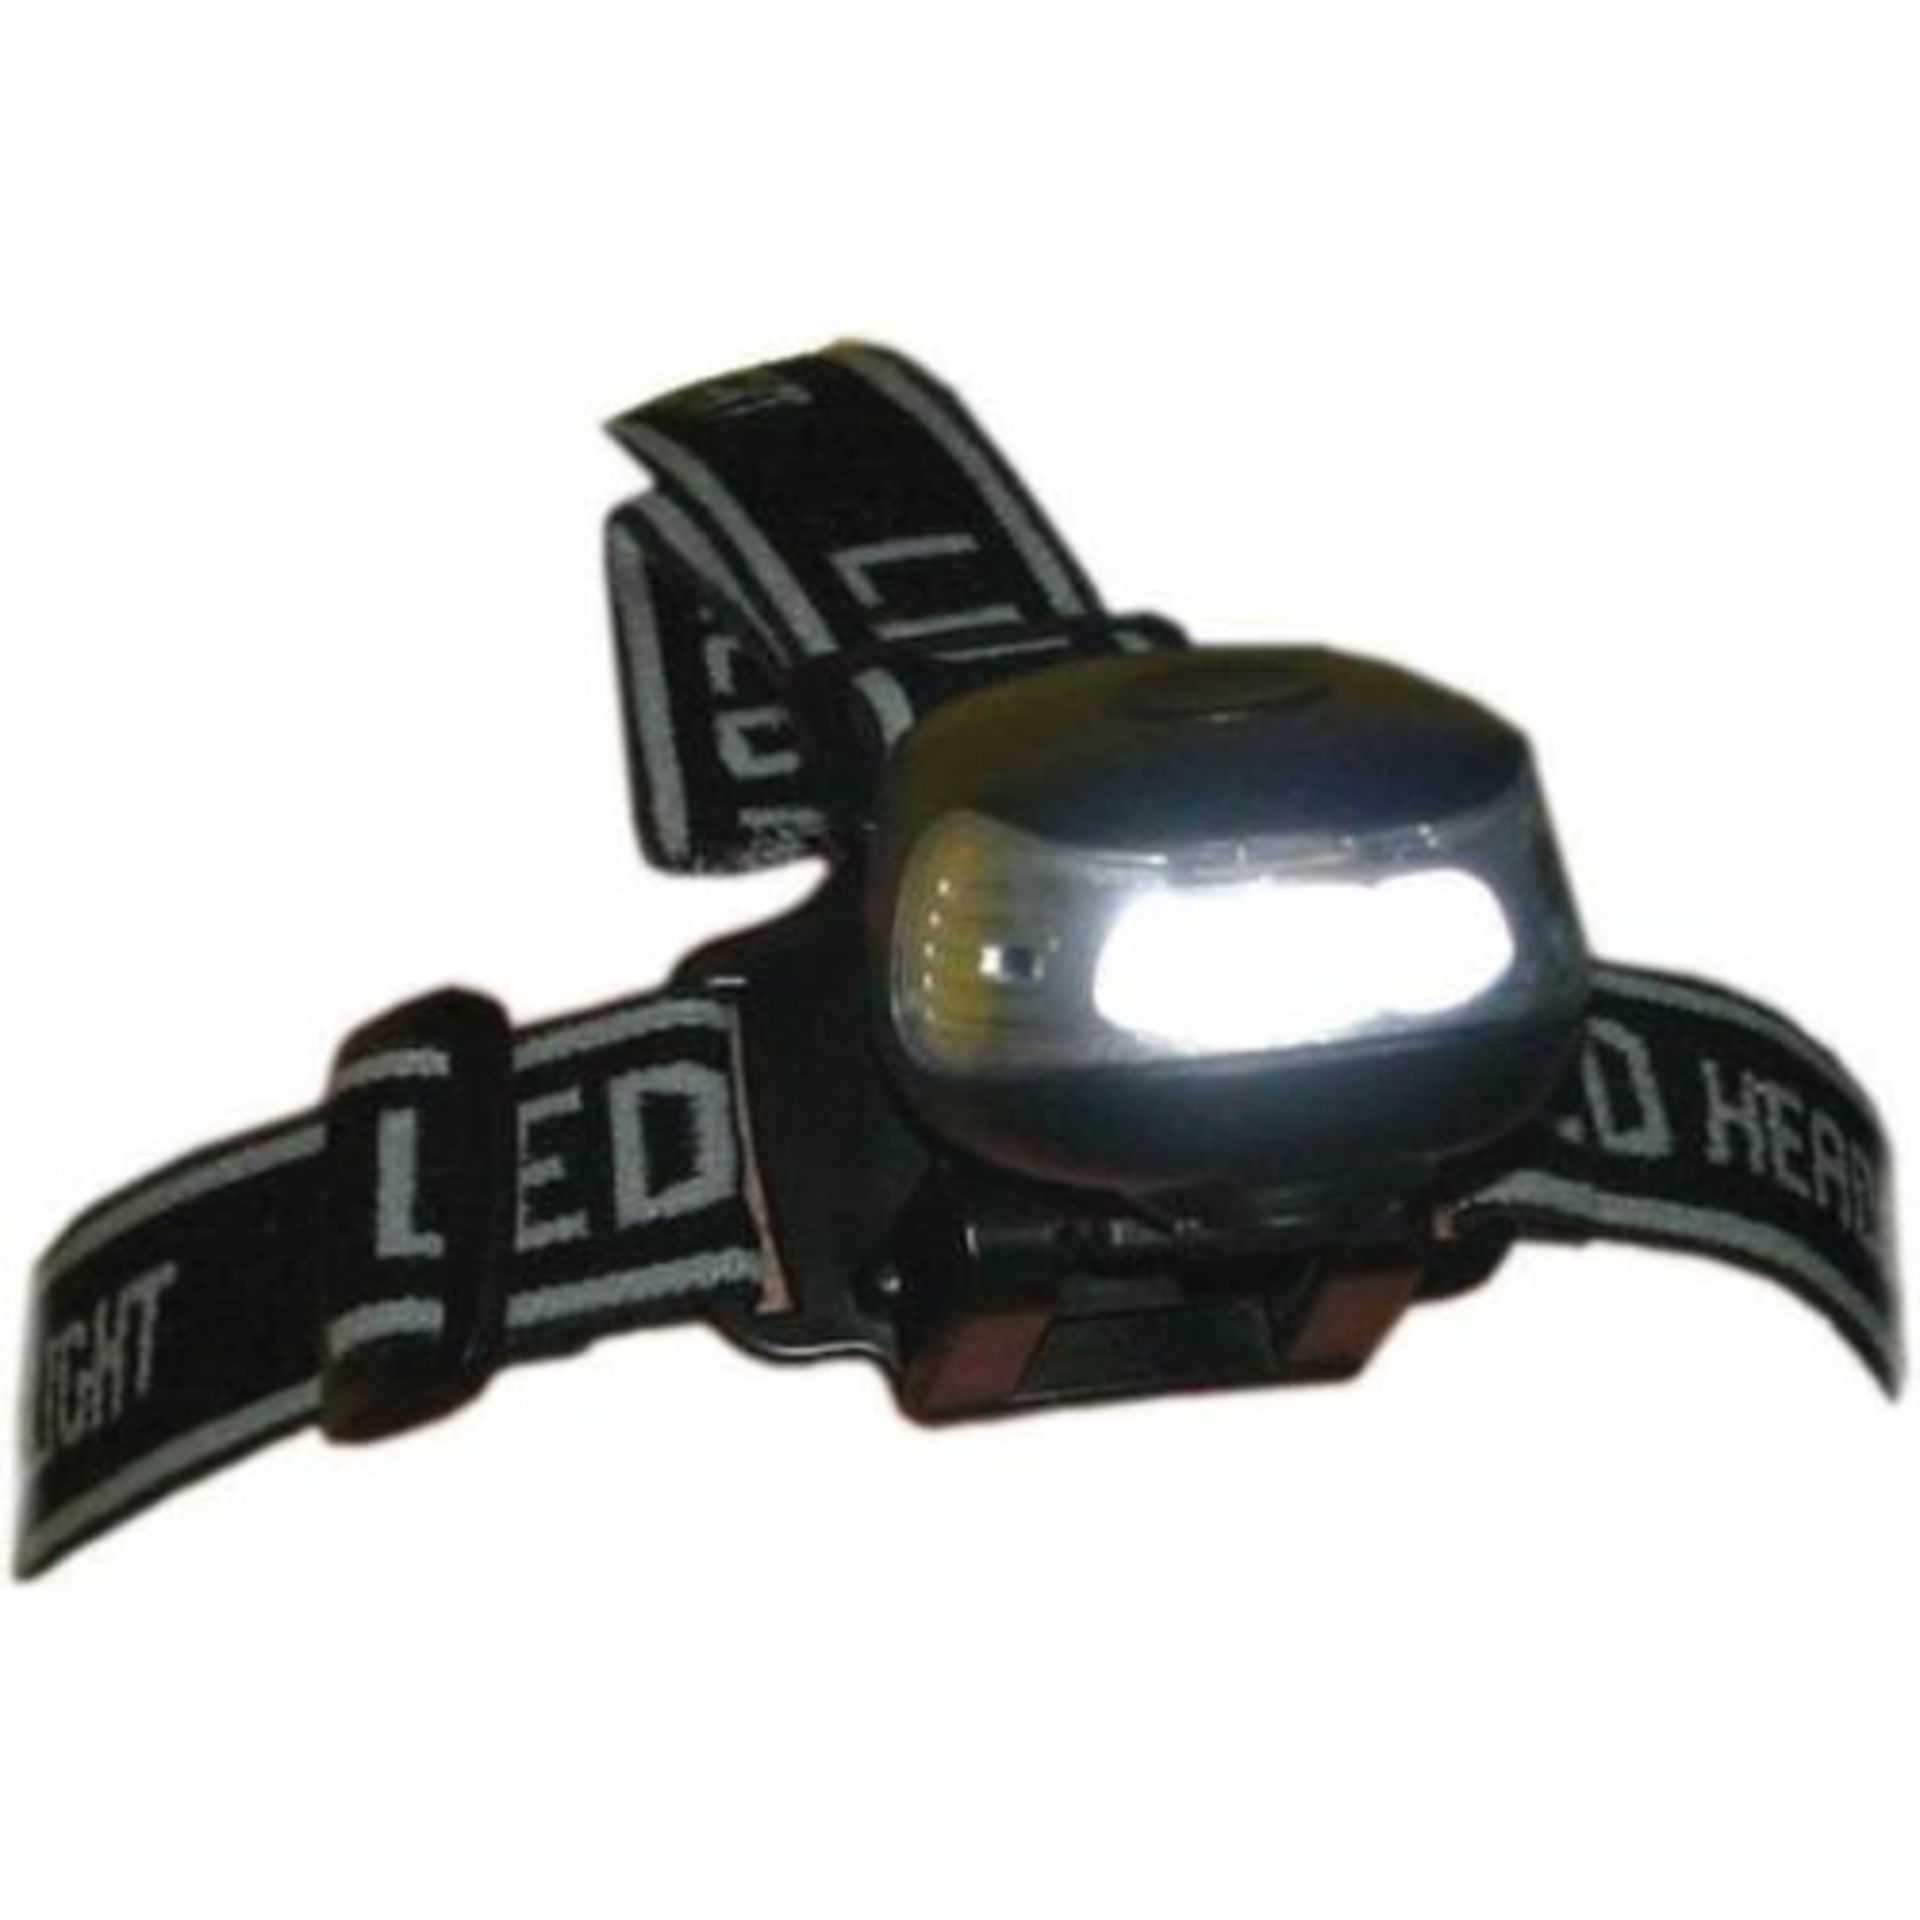 V Tritronic Optimax LED Headlamp with elastic strap and 3 leds / flasing red SRP 19.99 X 12  Bid